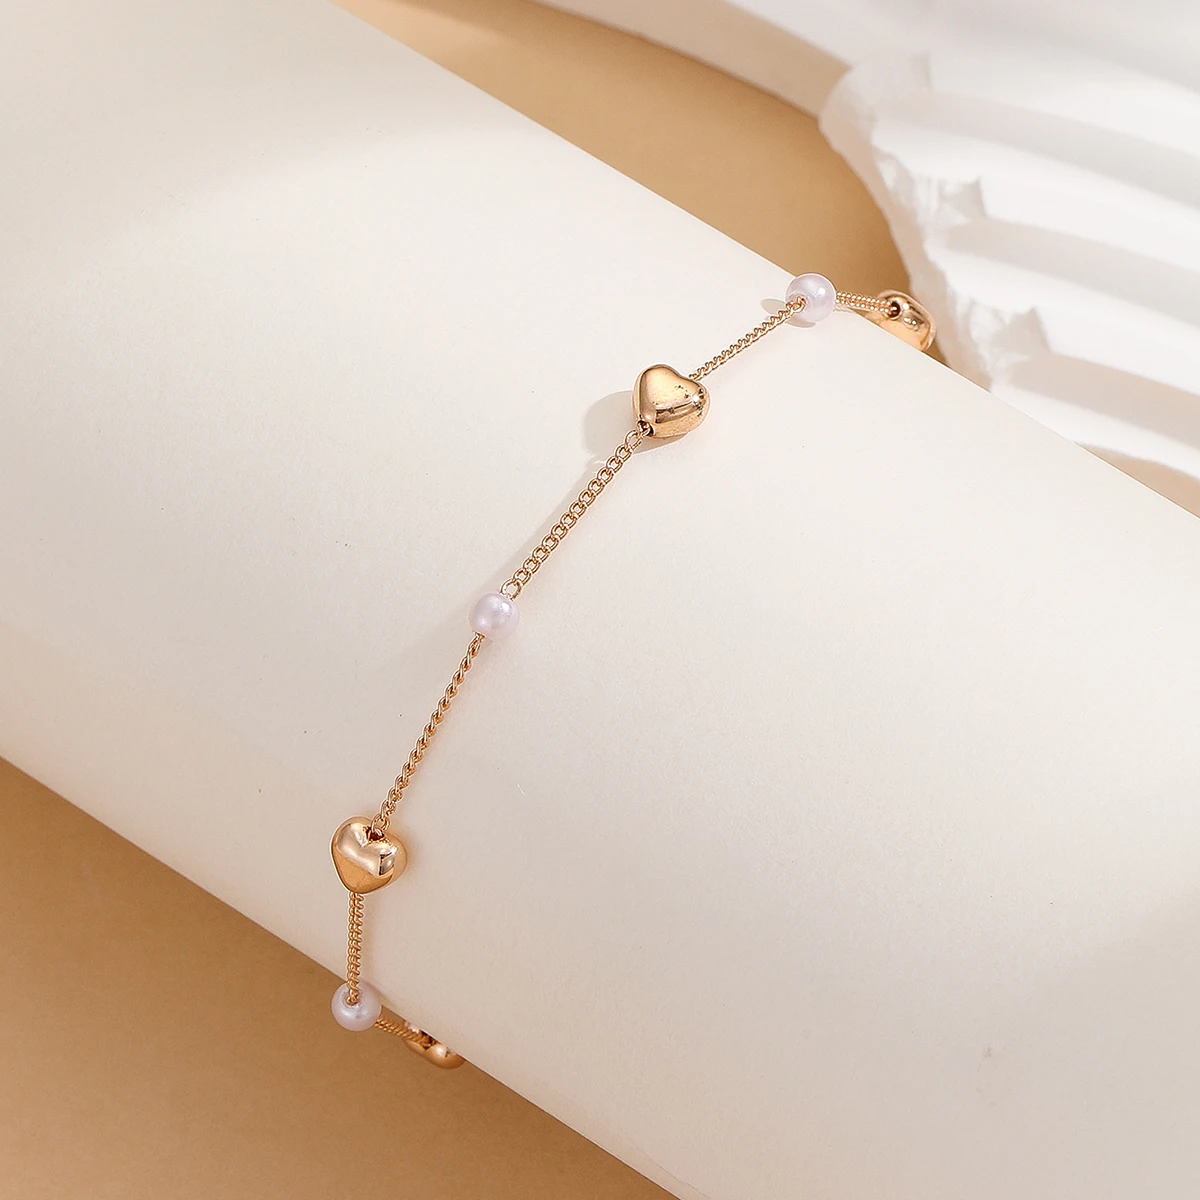 Vintage Heart Pearl Anklet Link Chains Bracelets for Women Girl Jewelry Barefoot Fashion Aesthetic Jewelry Female Birthday Gift